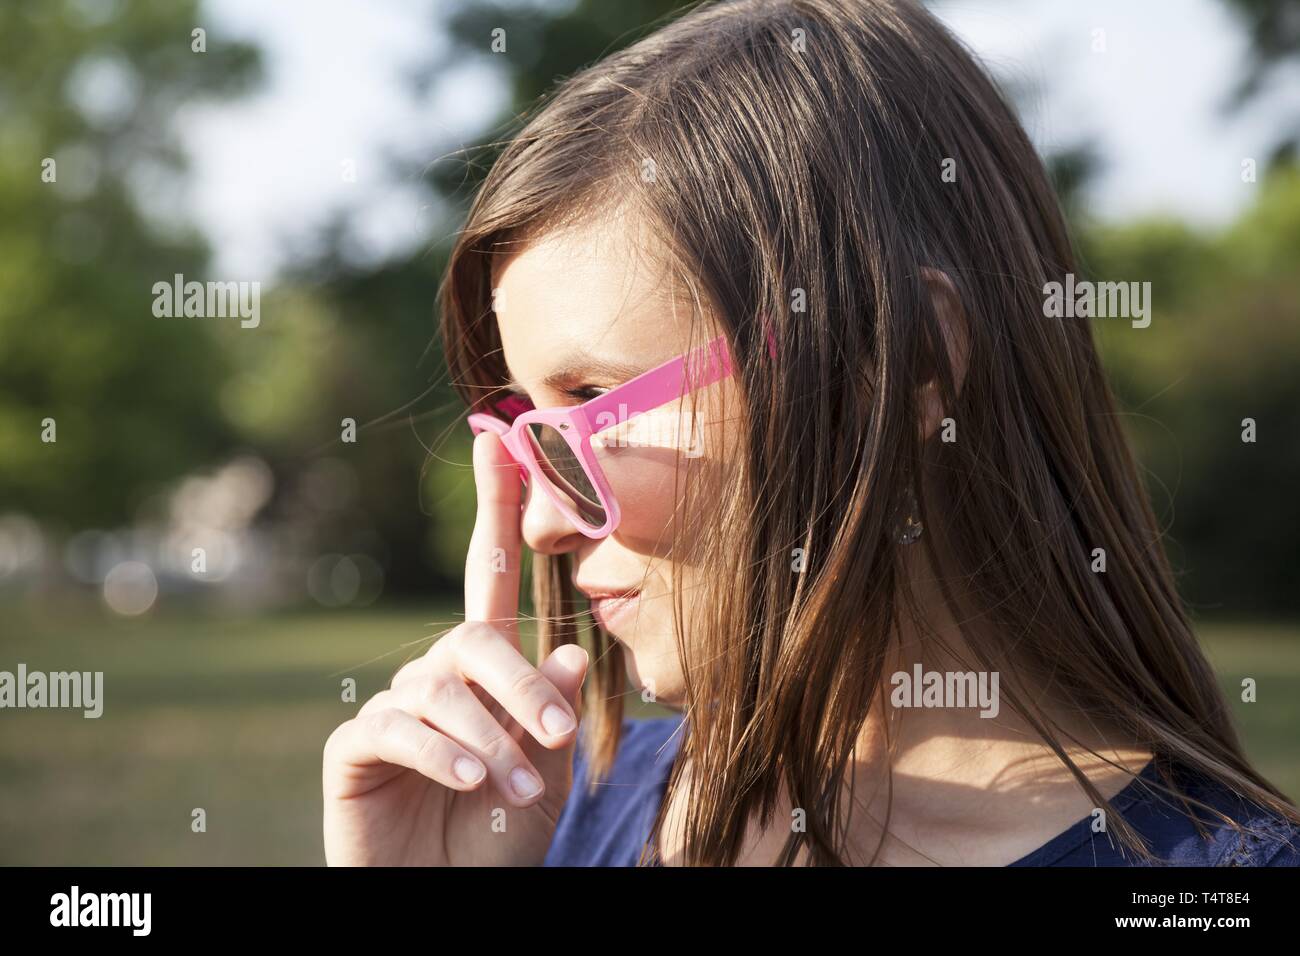 Young woman wearing sunglasses, Germany Stock Photo